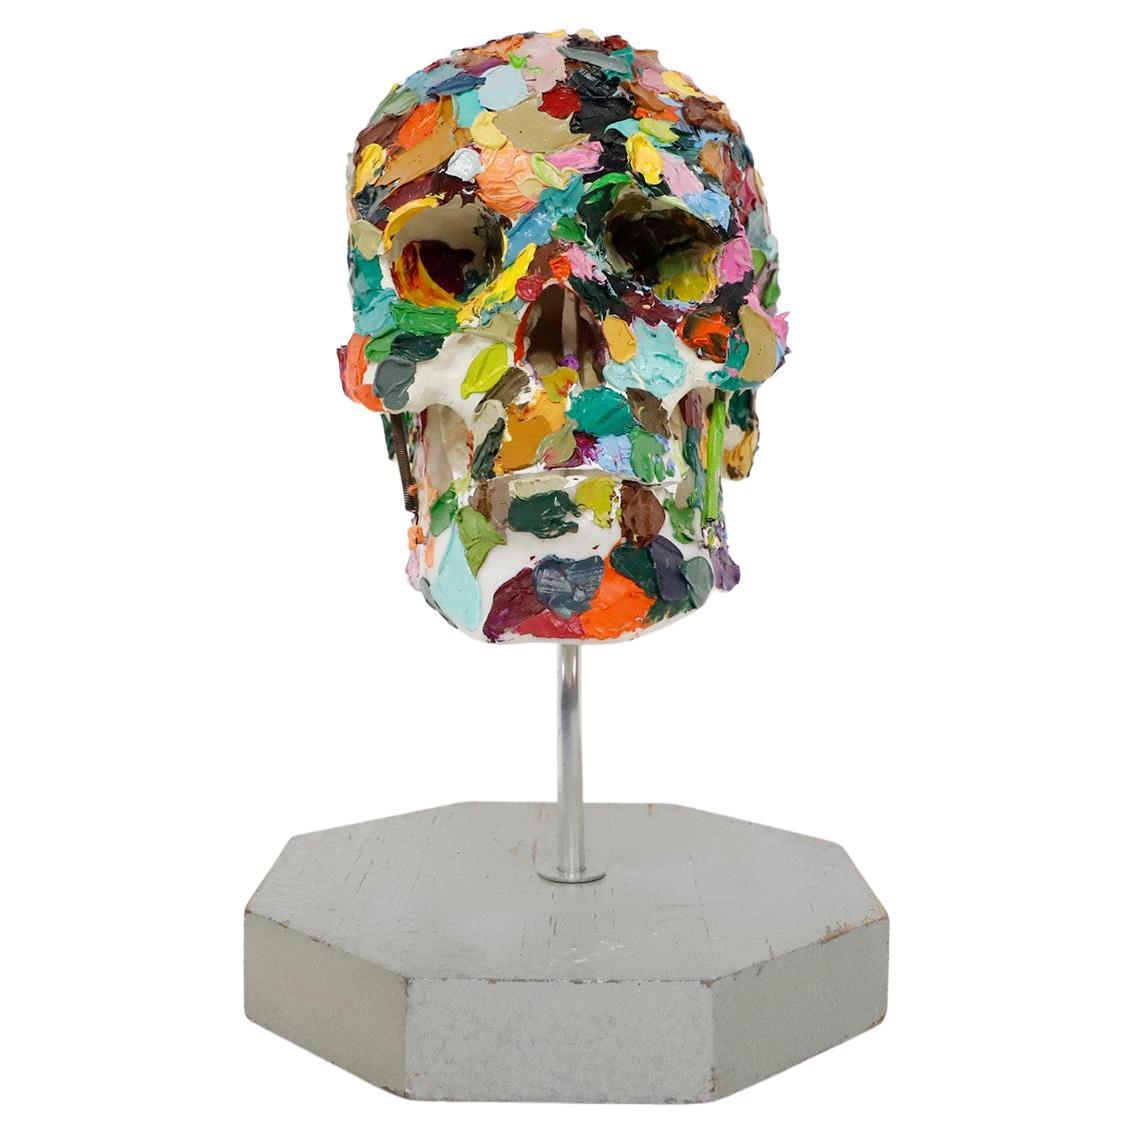 Painter Anatomical Skull For Sale